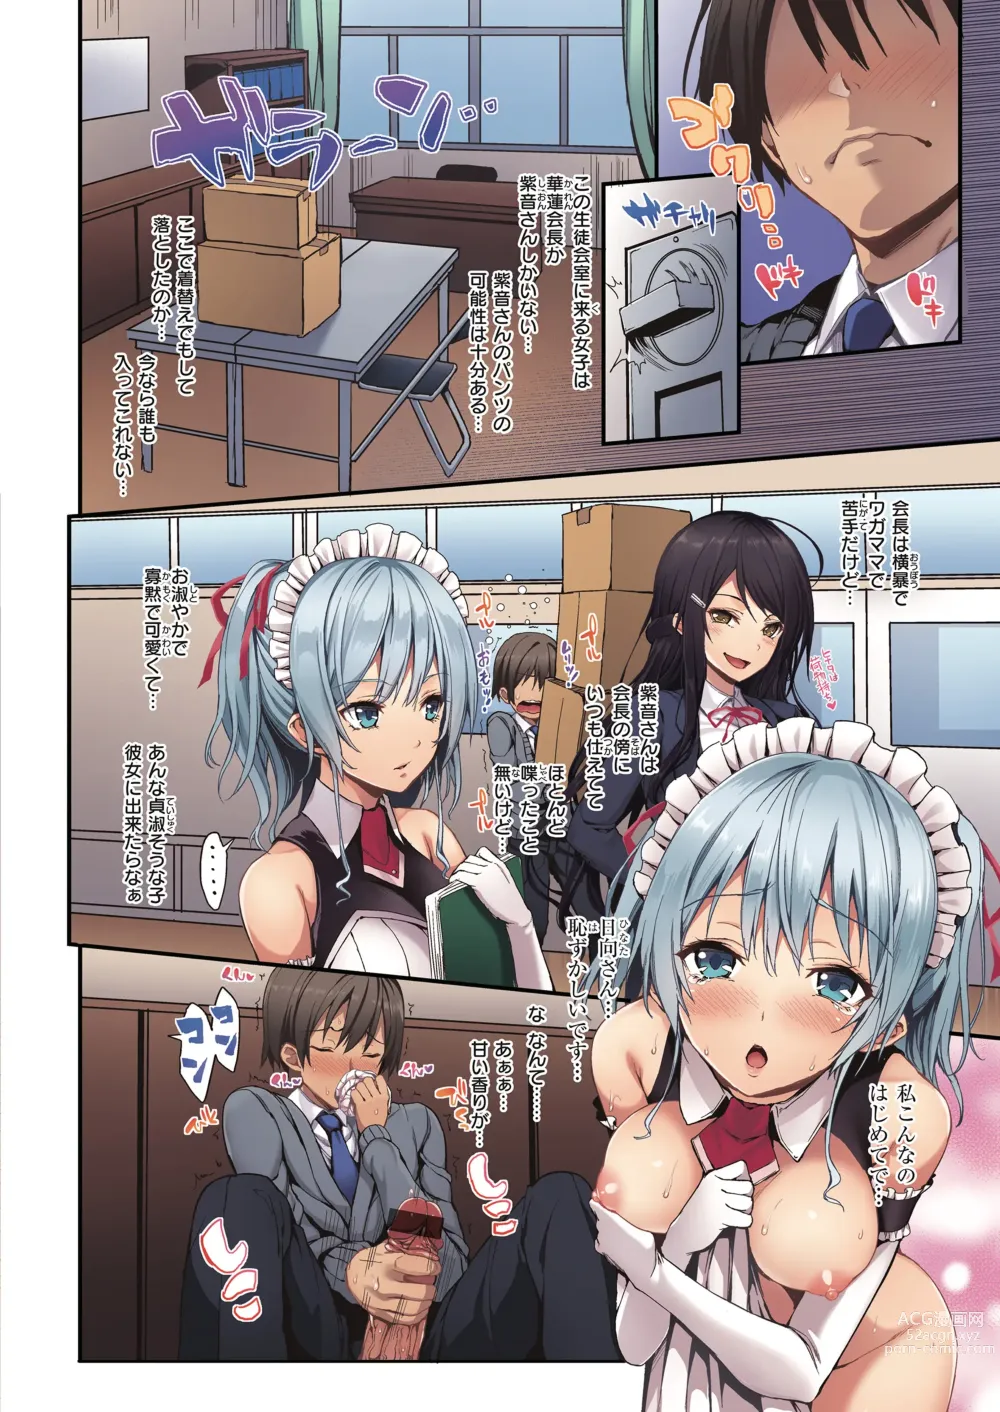 Page 6 of manga Shion Connect